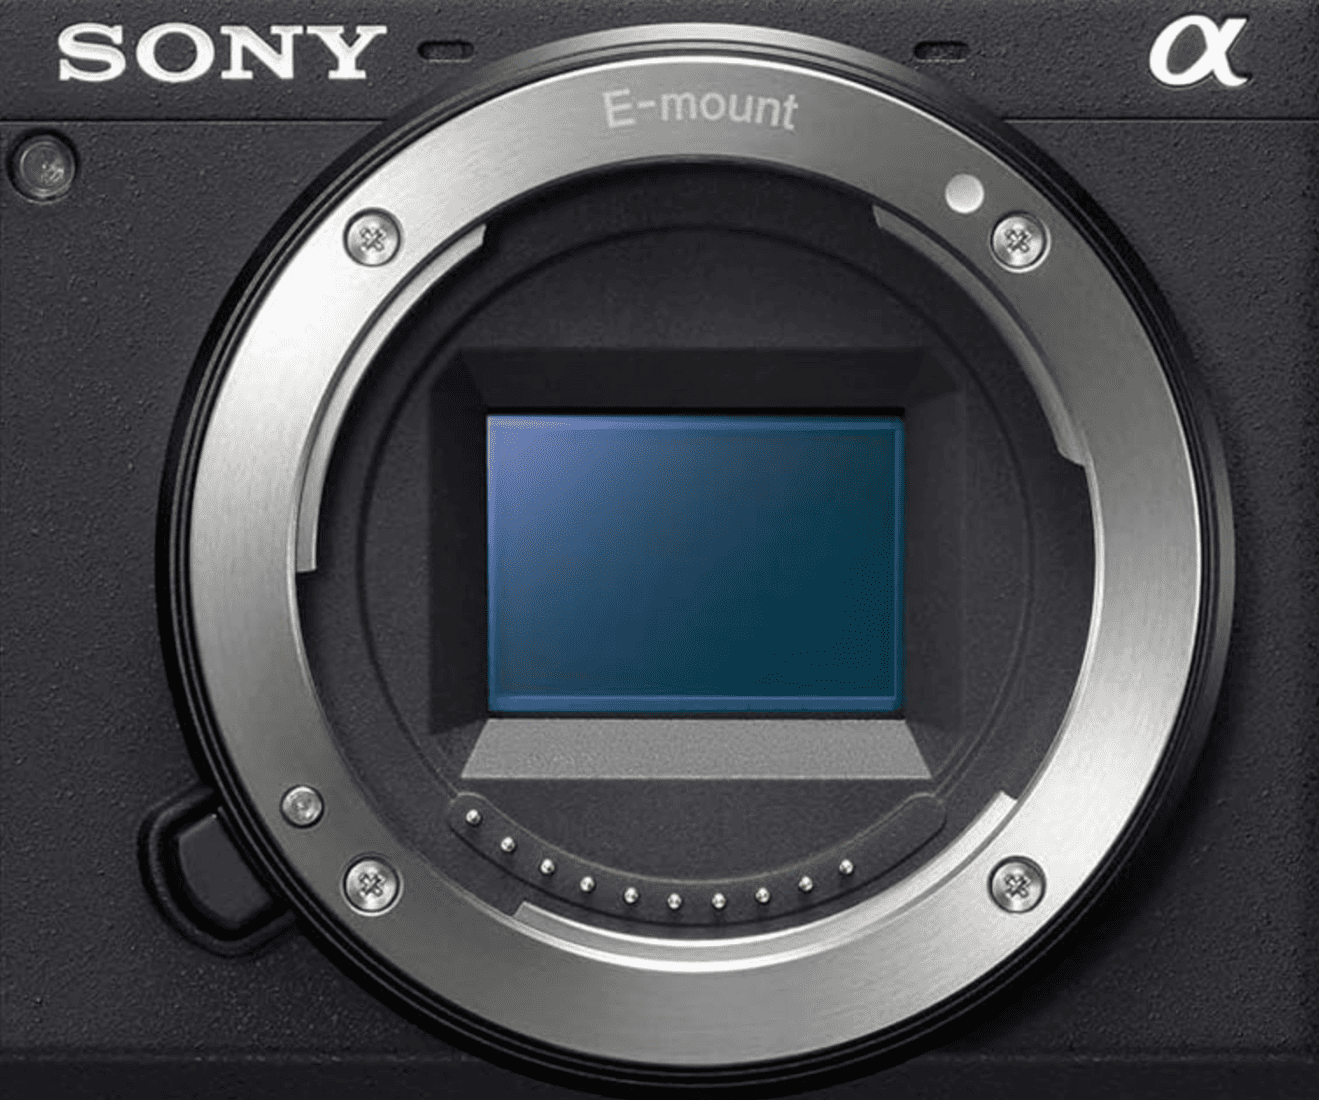 Sony's Alpha 6600 Mirrorless‌ Camera Has The Fastest Autofocus In